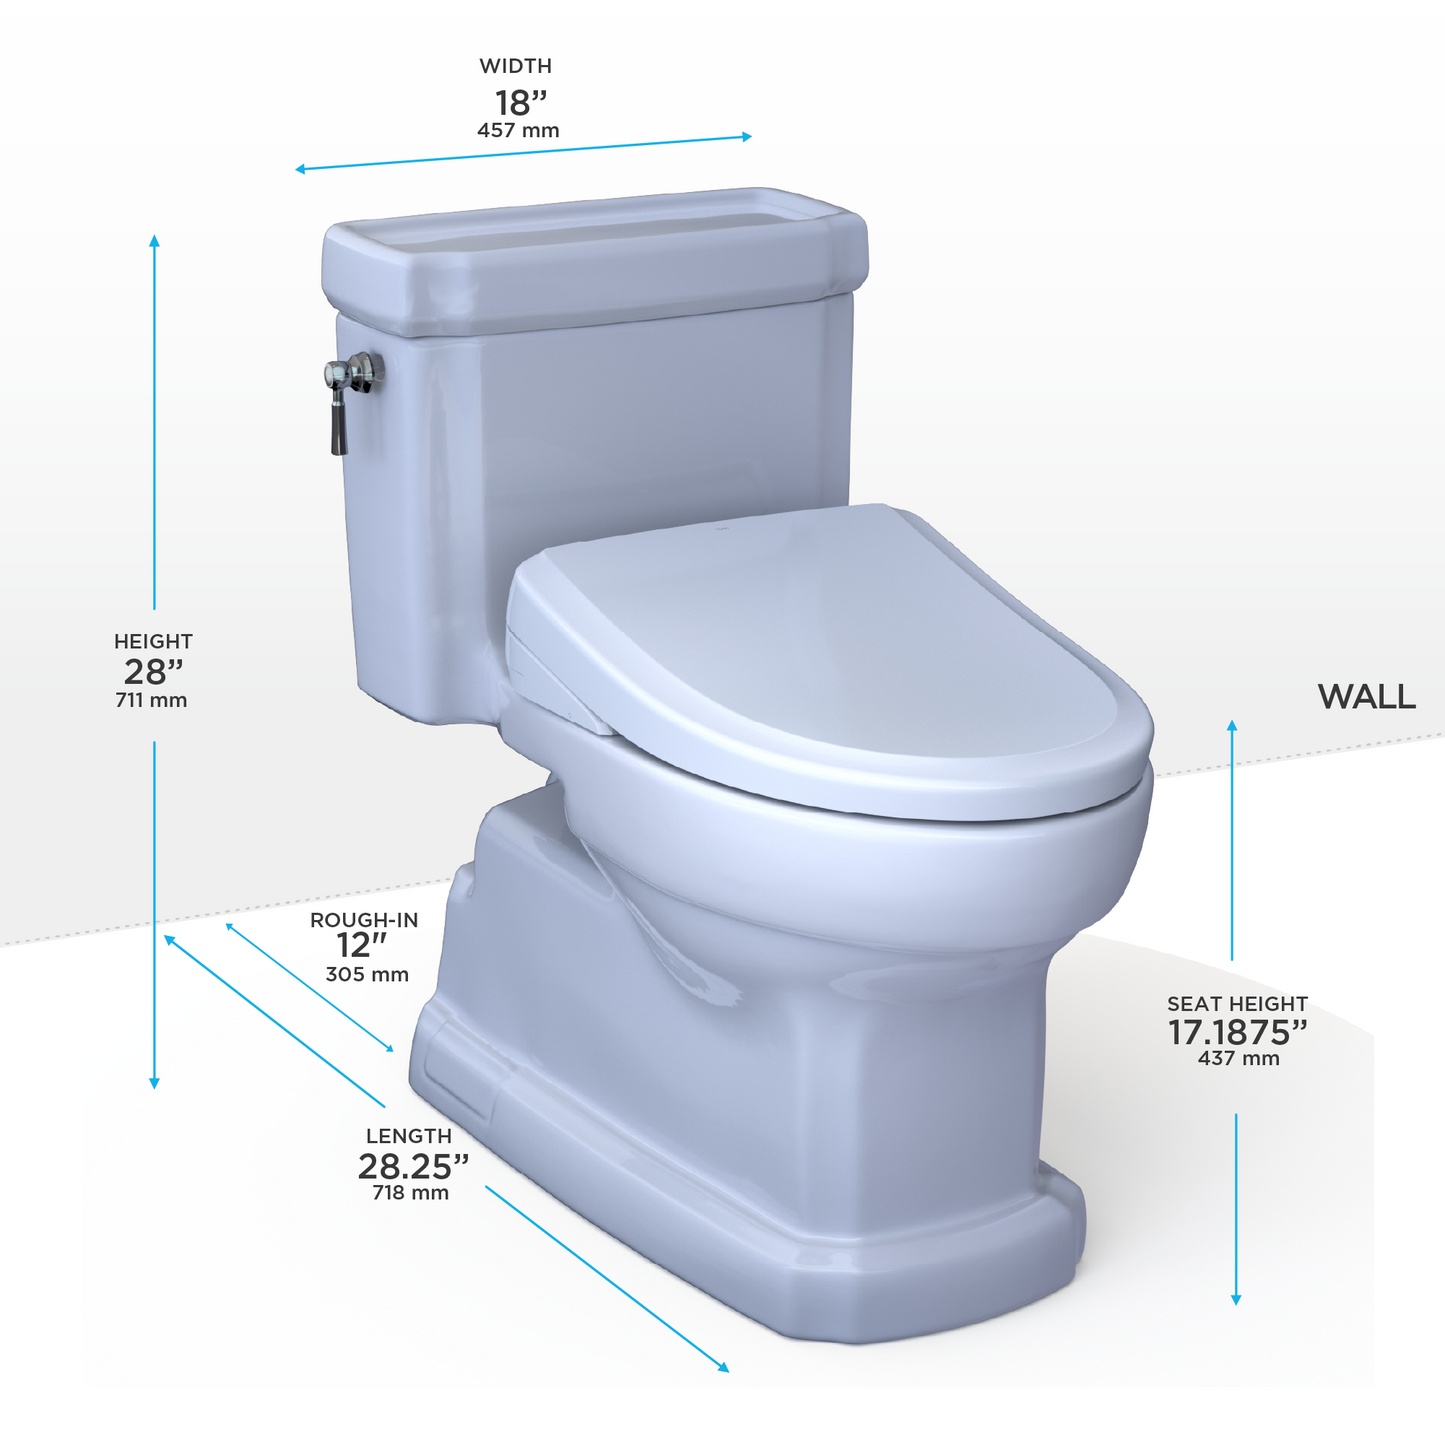 TOTO® WASHLET®+ Eco Guinevere® Elongated 1.28 GPF Universal Height Toilet with S7 Classic Bidet Seat, Cotton White - MW9744724CEFG#01